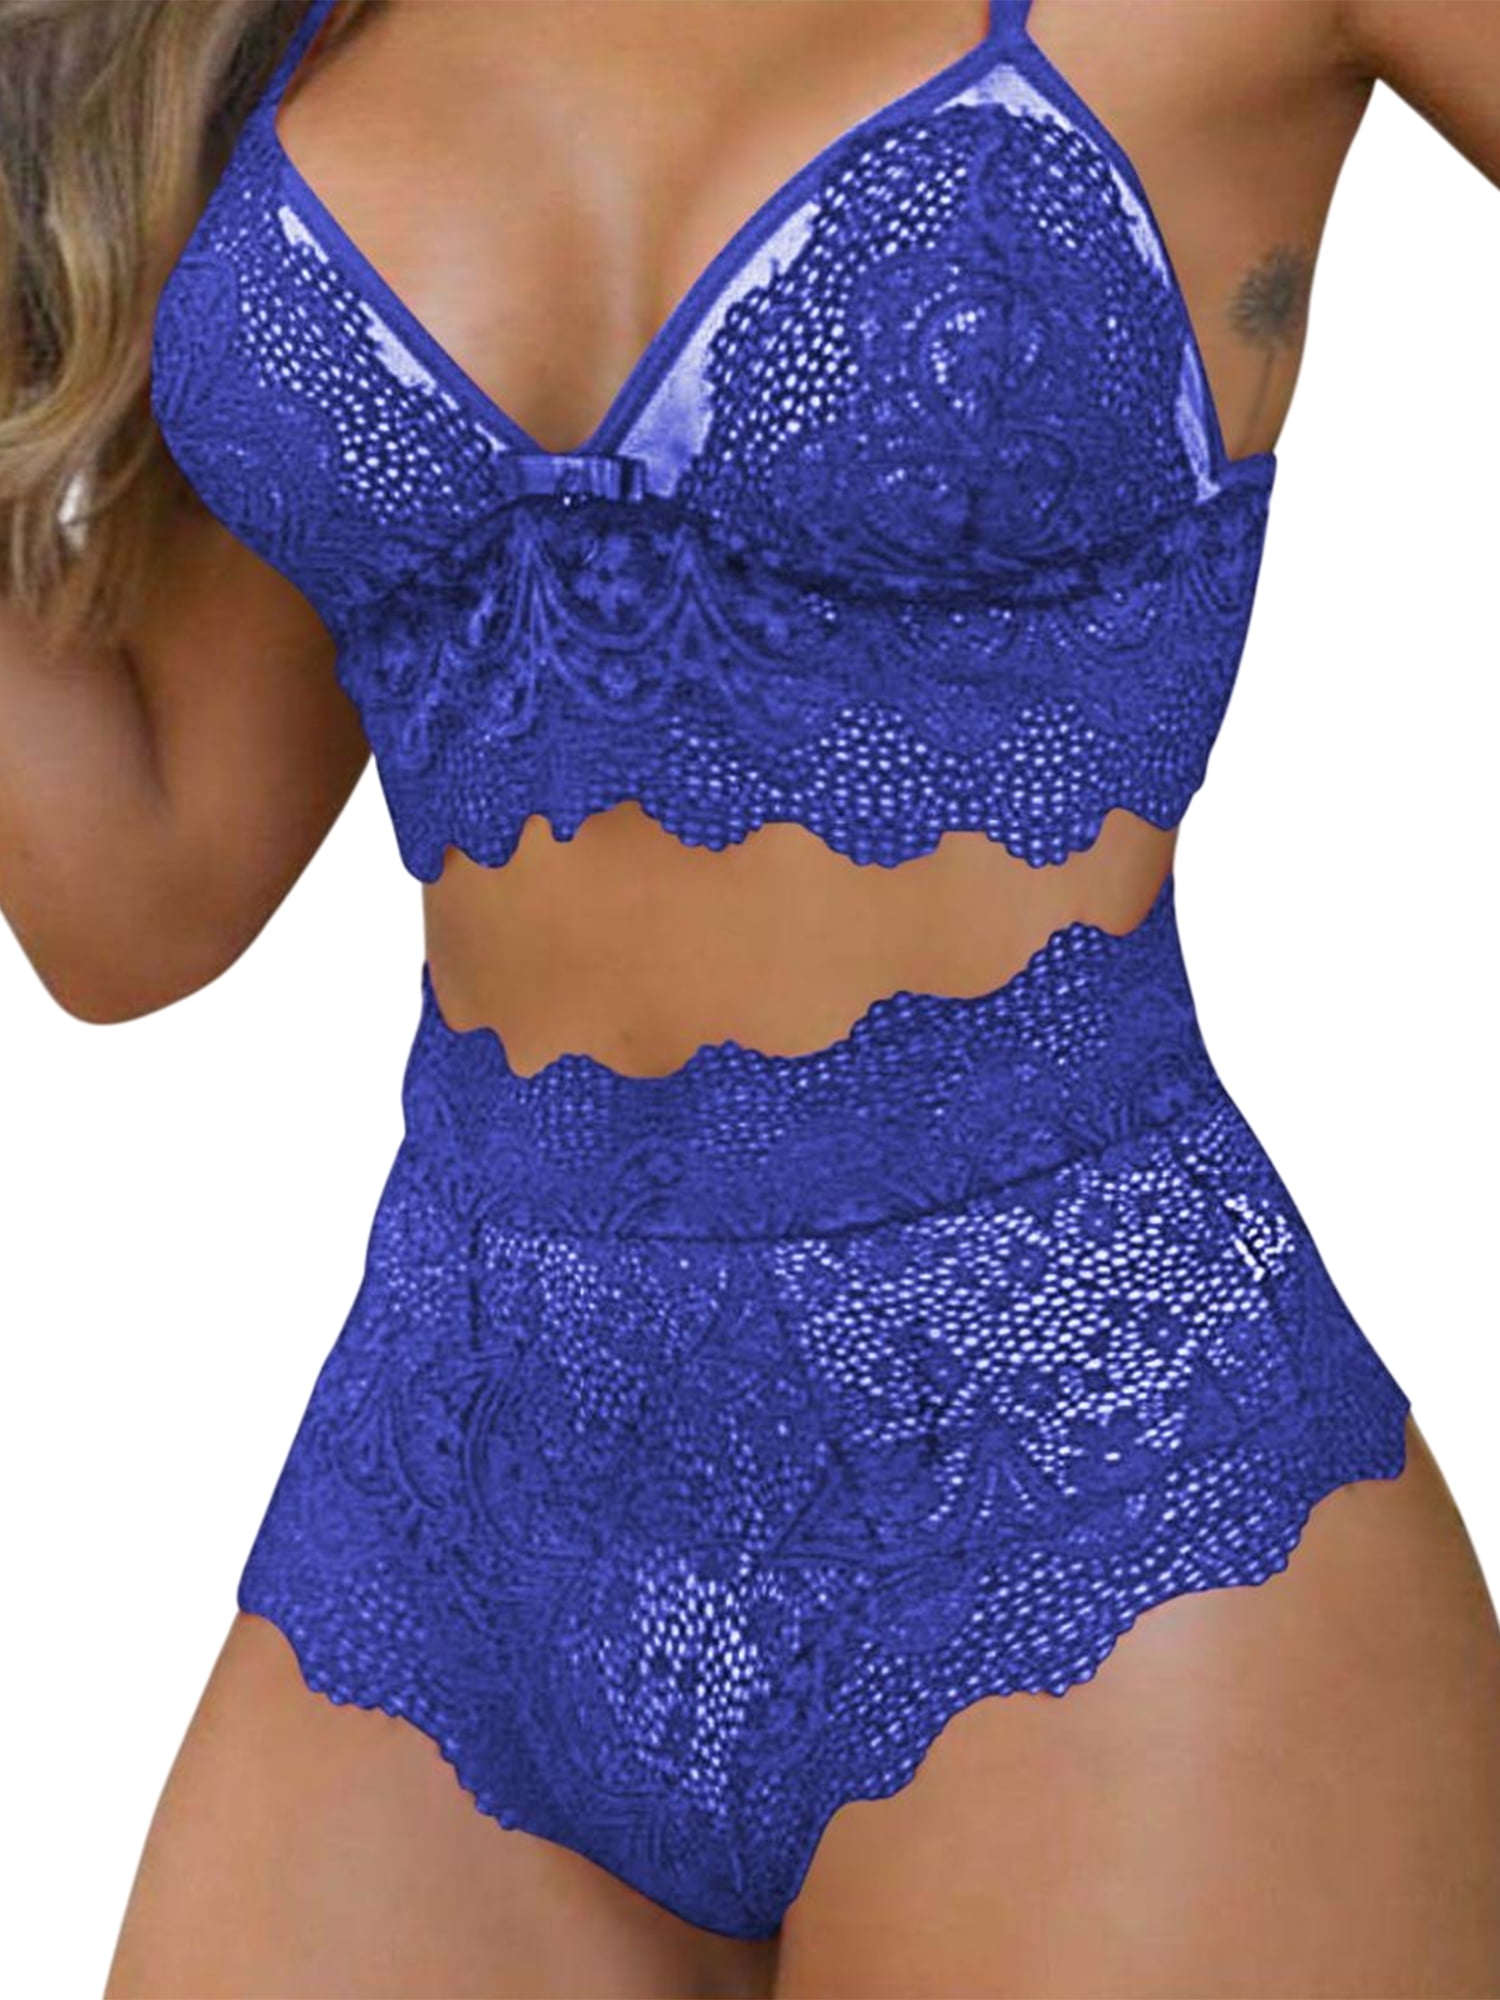 Glonme Ladies Lingerie Set 2 Pieces Underwear Teddy Sexy Bodysuit Lace  Babydoll Women Sheer See Through Transparent Bra And Panty Sets Light Blue  M 